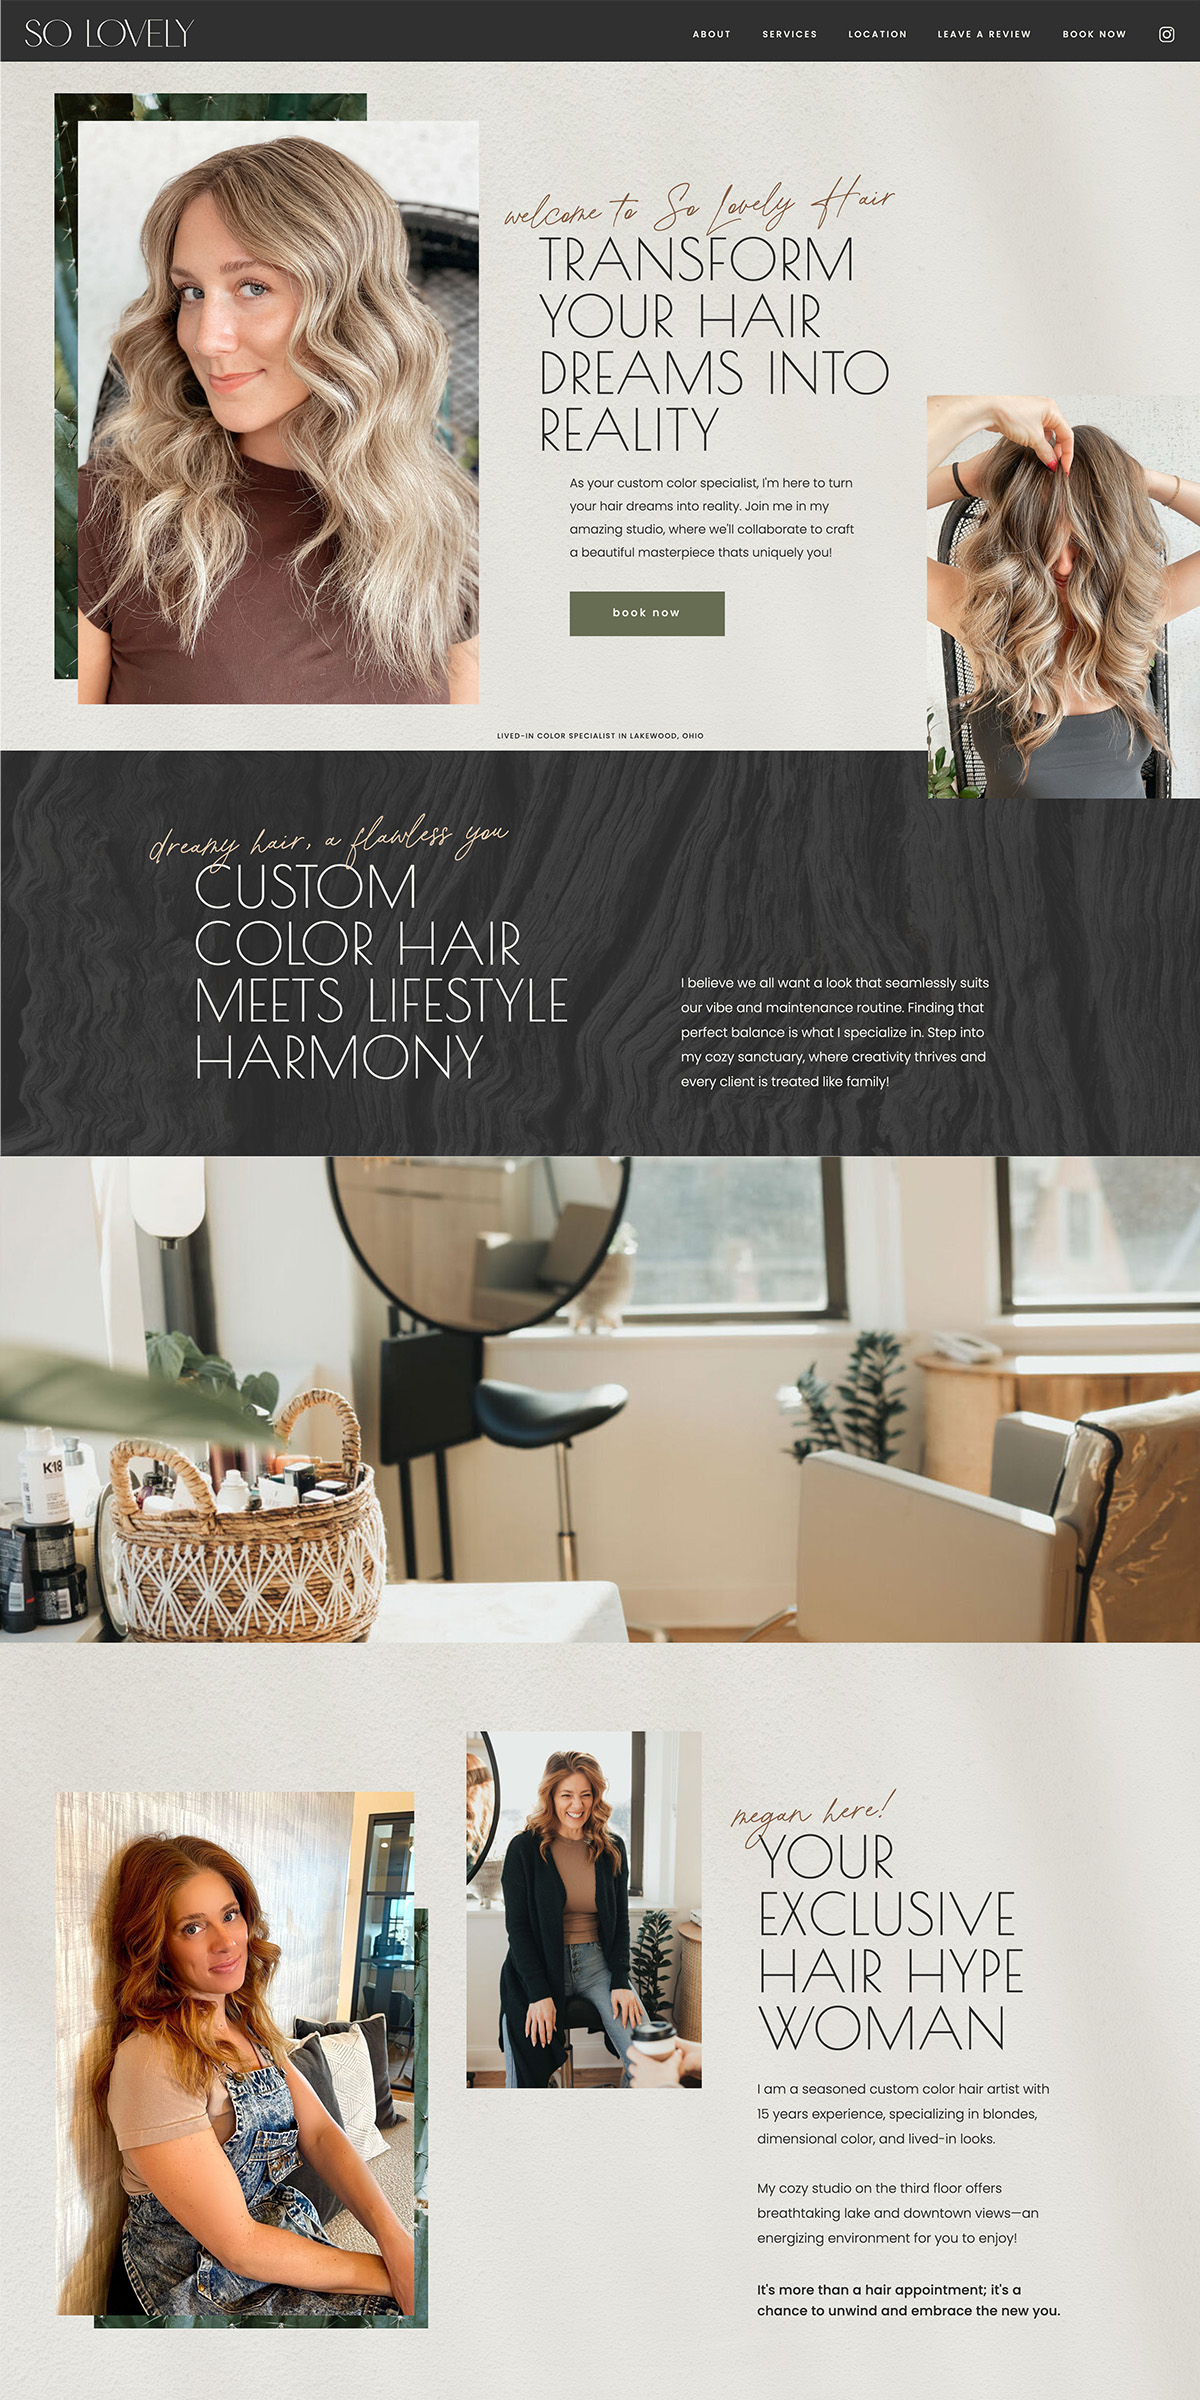 Website Design for an Independent Stylist | So Lovely Hair Design - by Hey Hello Studio